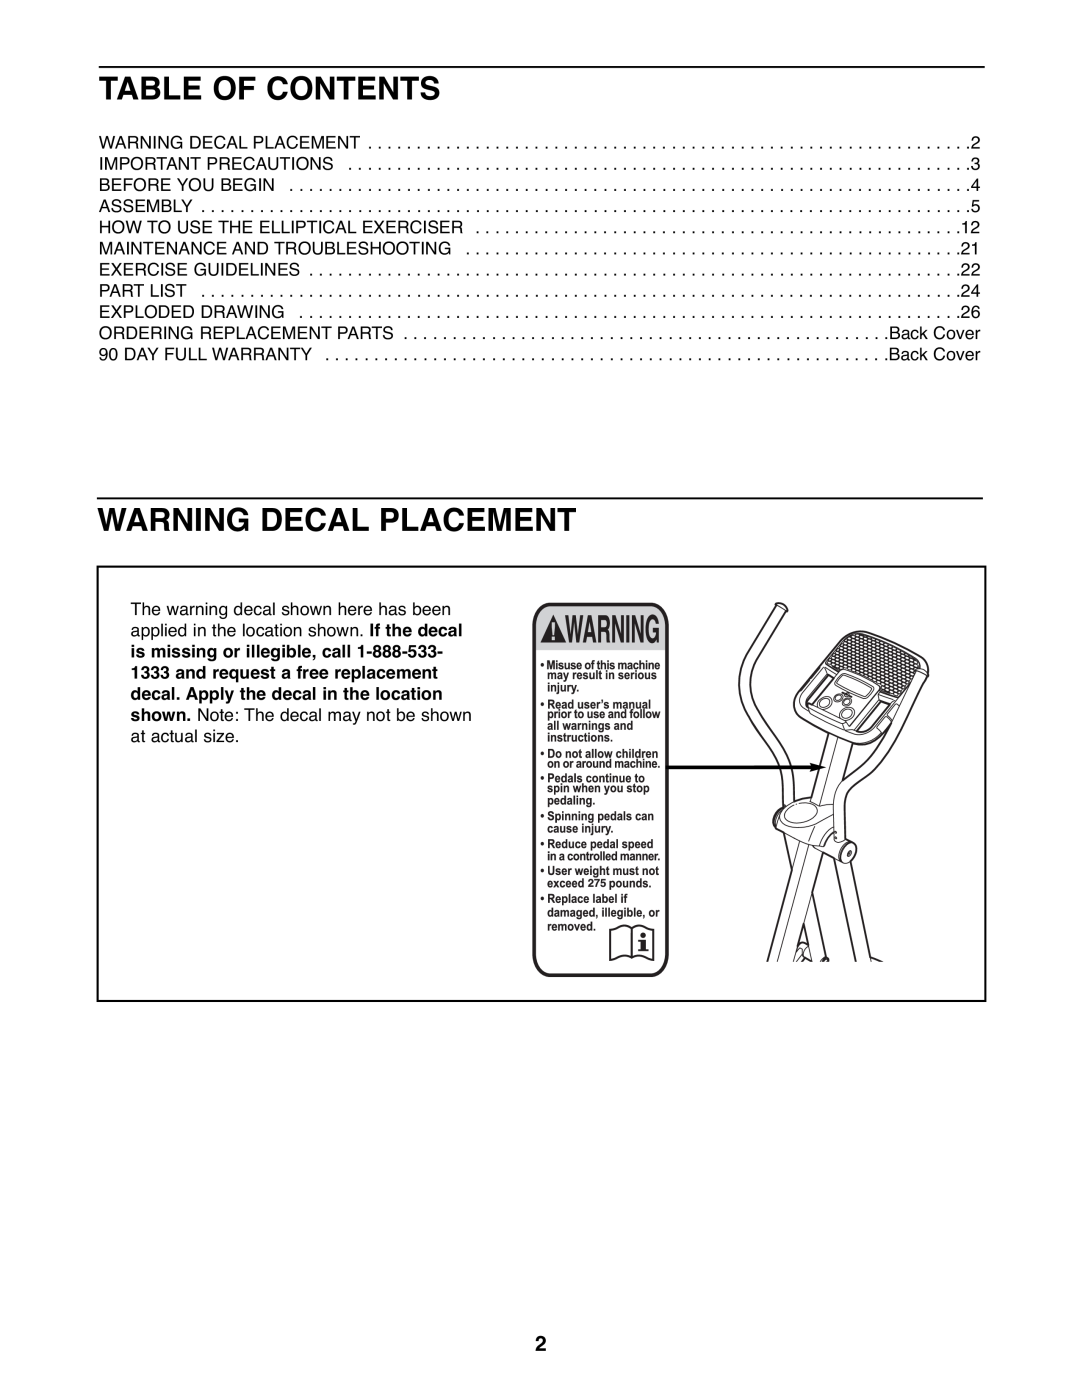 ProForm 831.23744.0 user manual Table Of Contents, Warning Decal Placement 